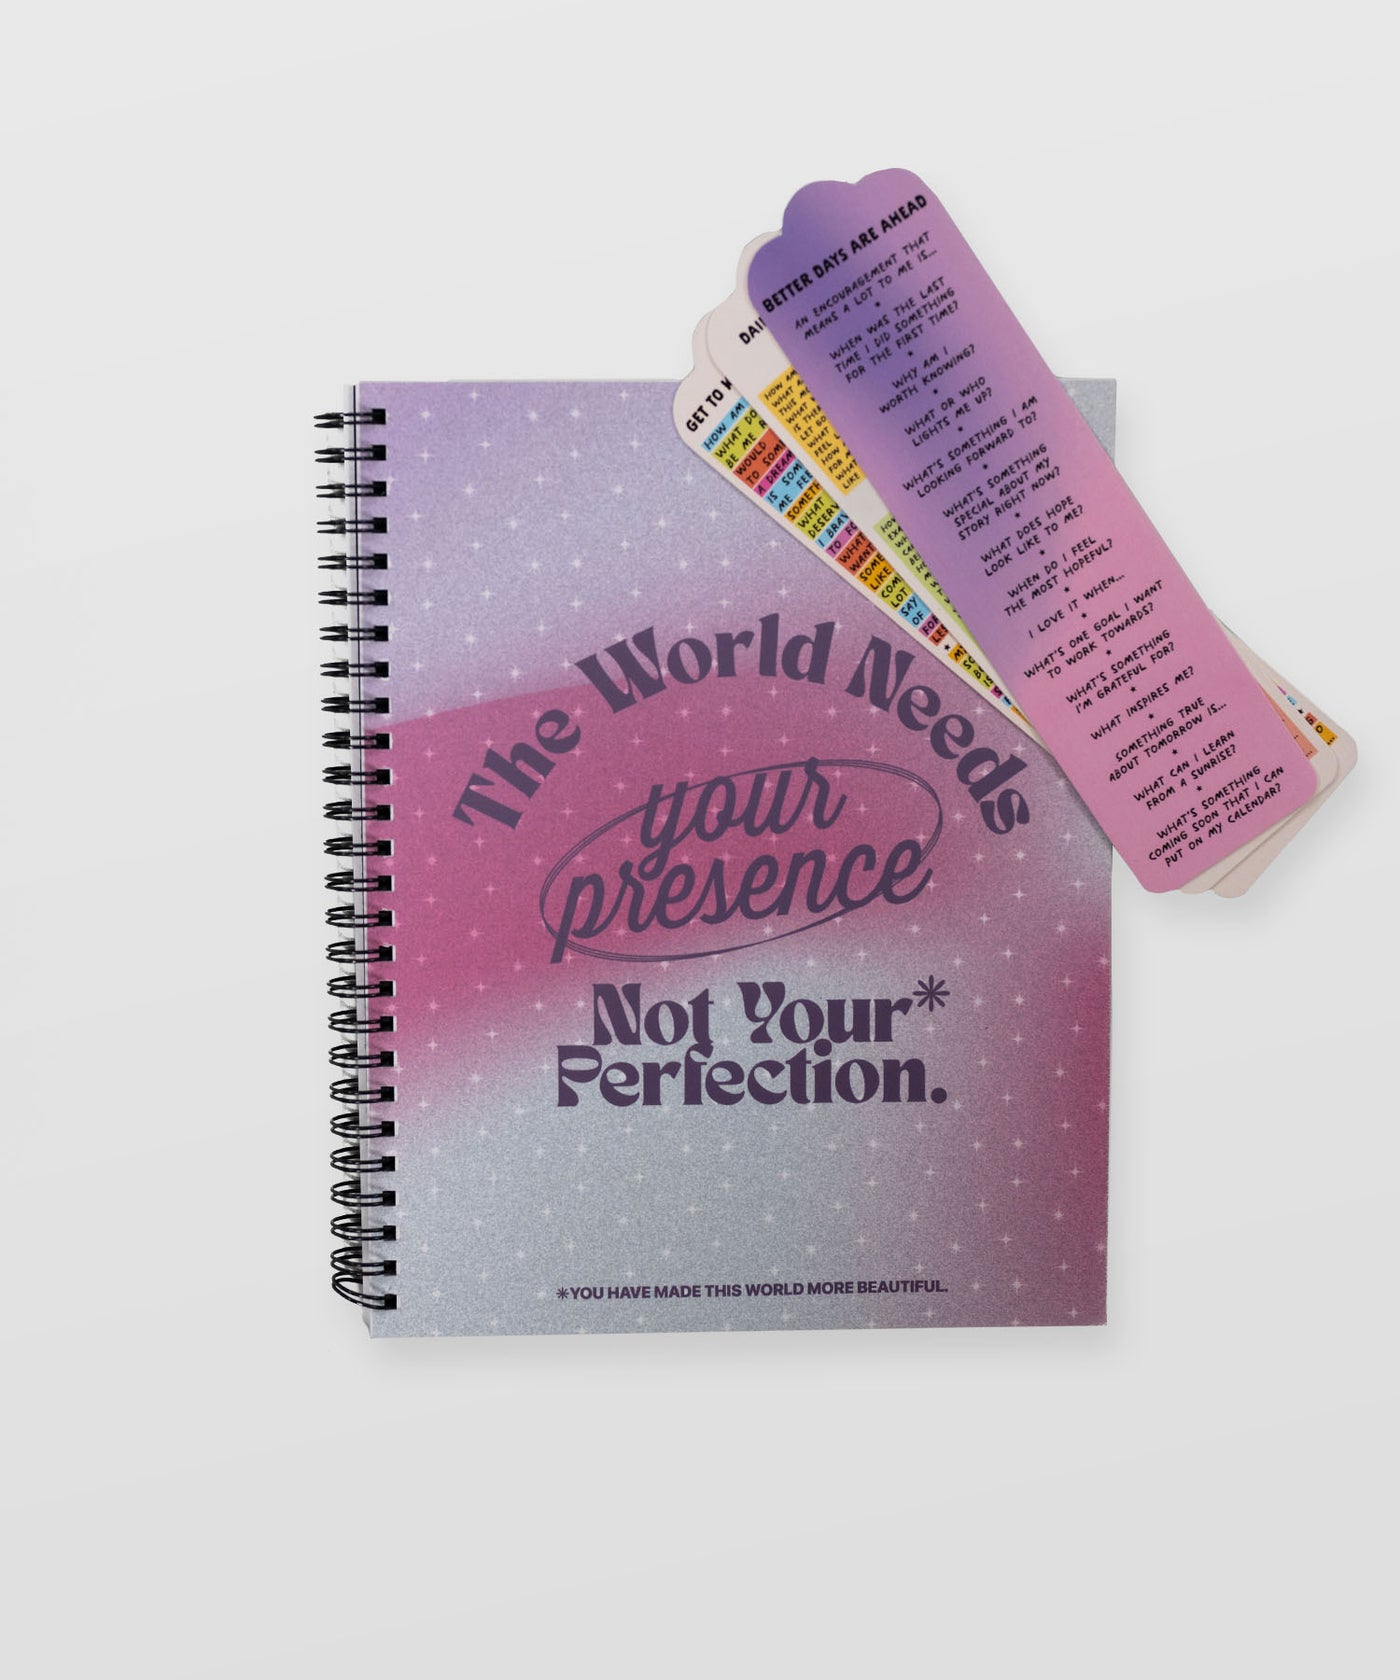 The World Needs You Journal + Guided Bookmark Bundle